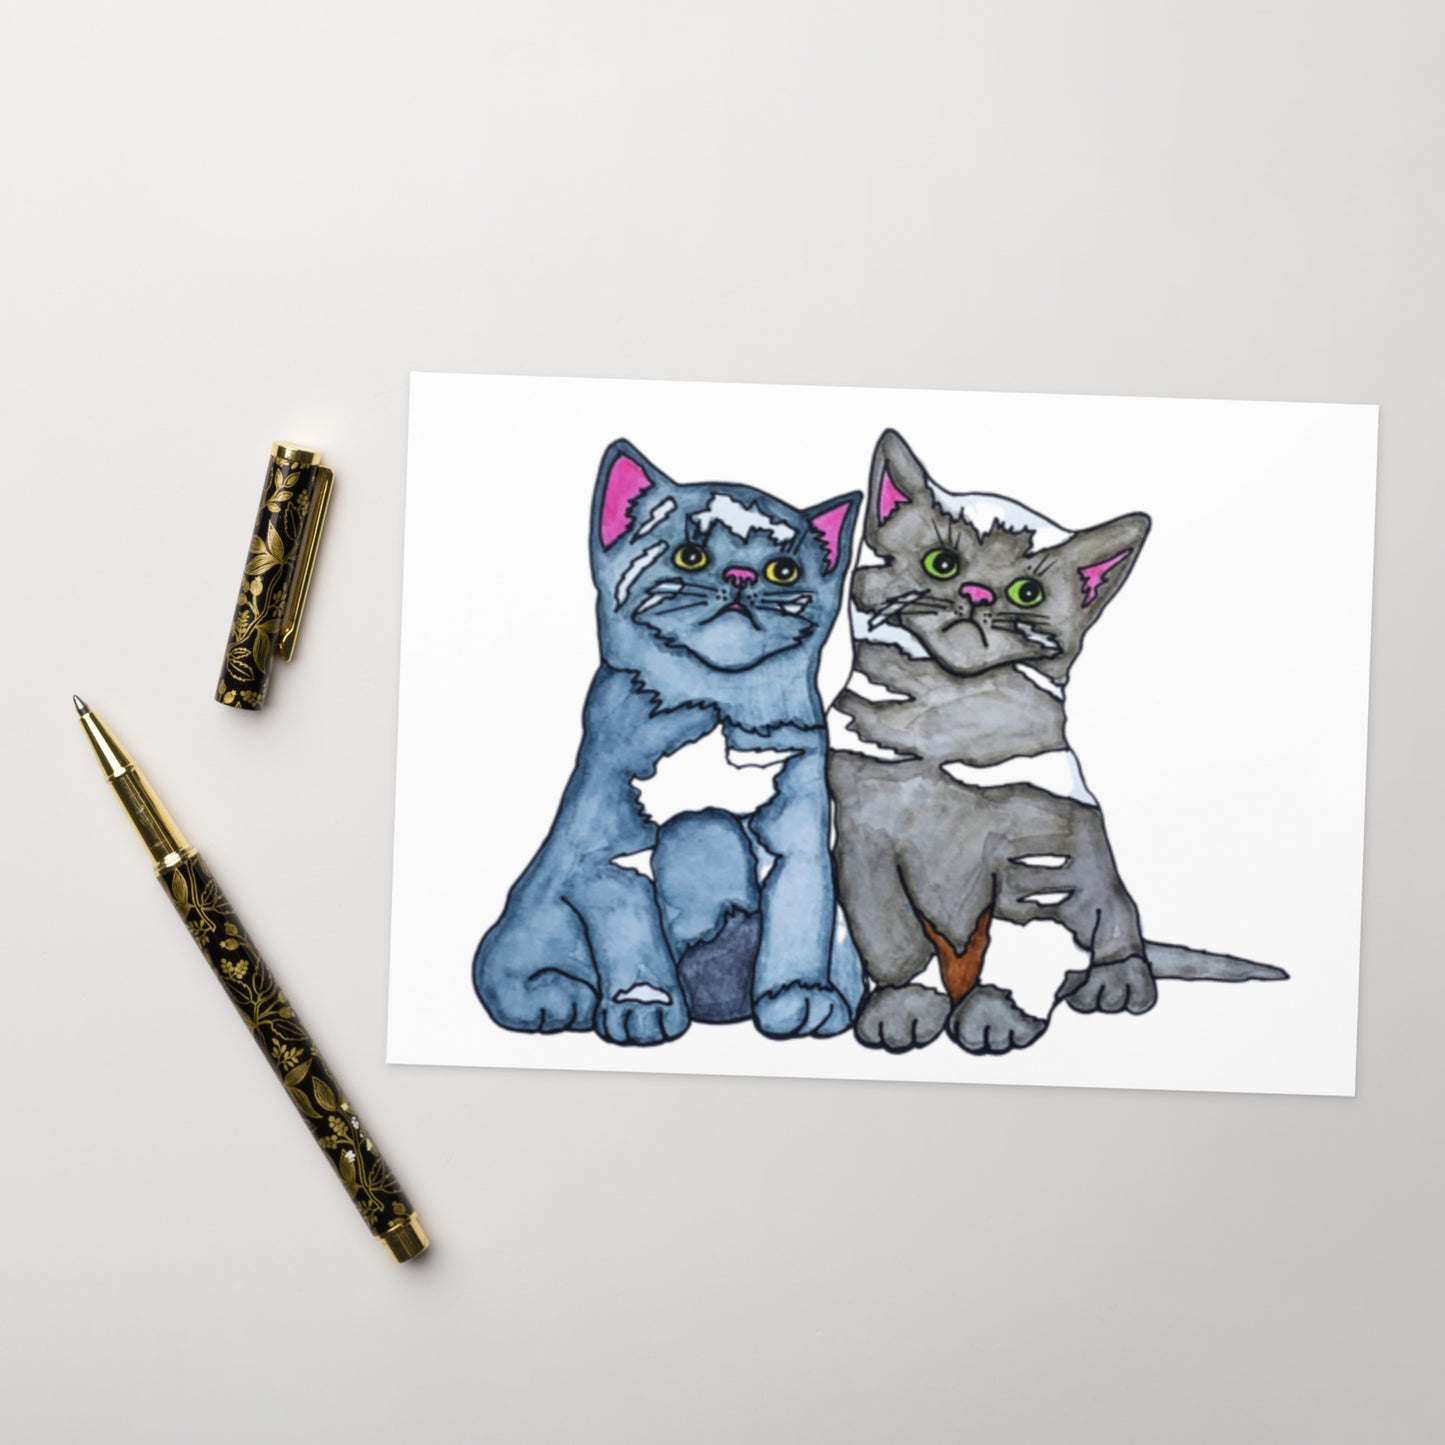 Two Kitty Cats Greeting card - Art Love Decor